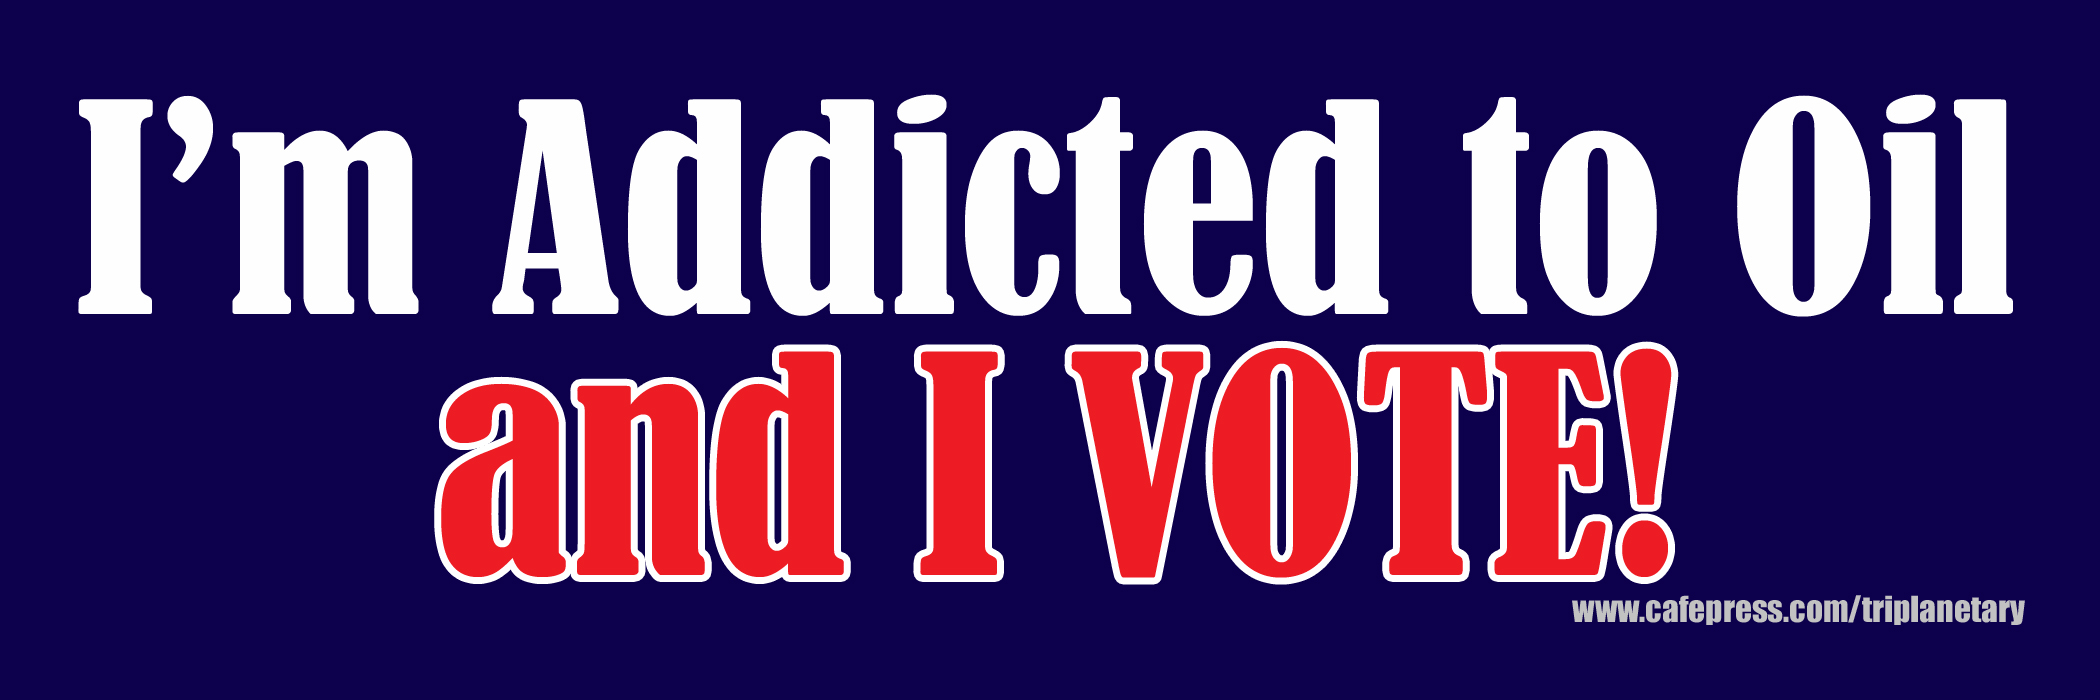 Red, white, and lavendar image of bumper sticker: 'I'm Addicted to Oil and I VOTE'